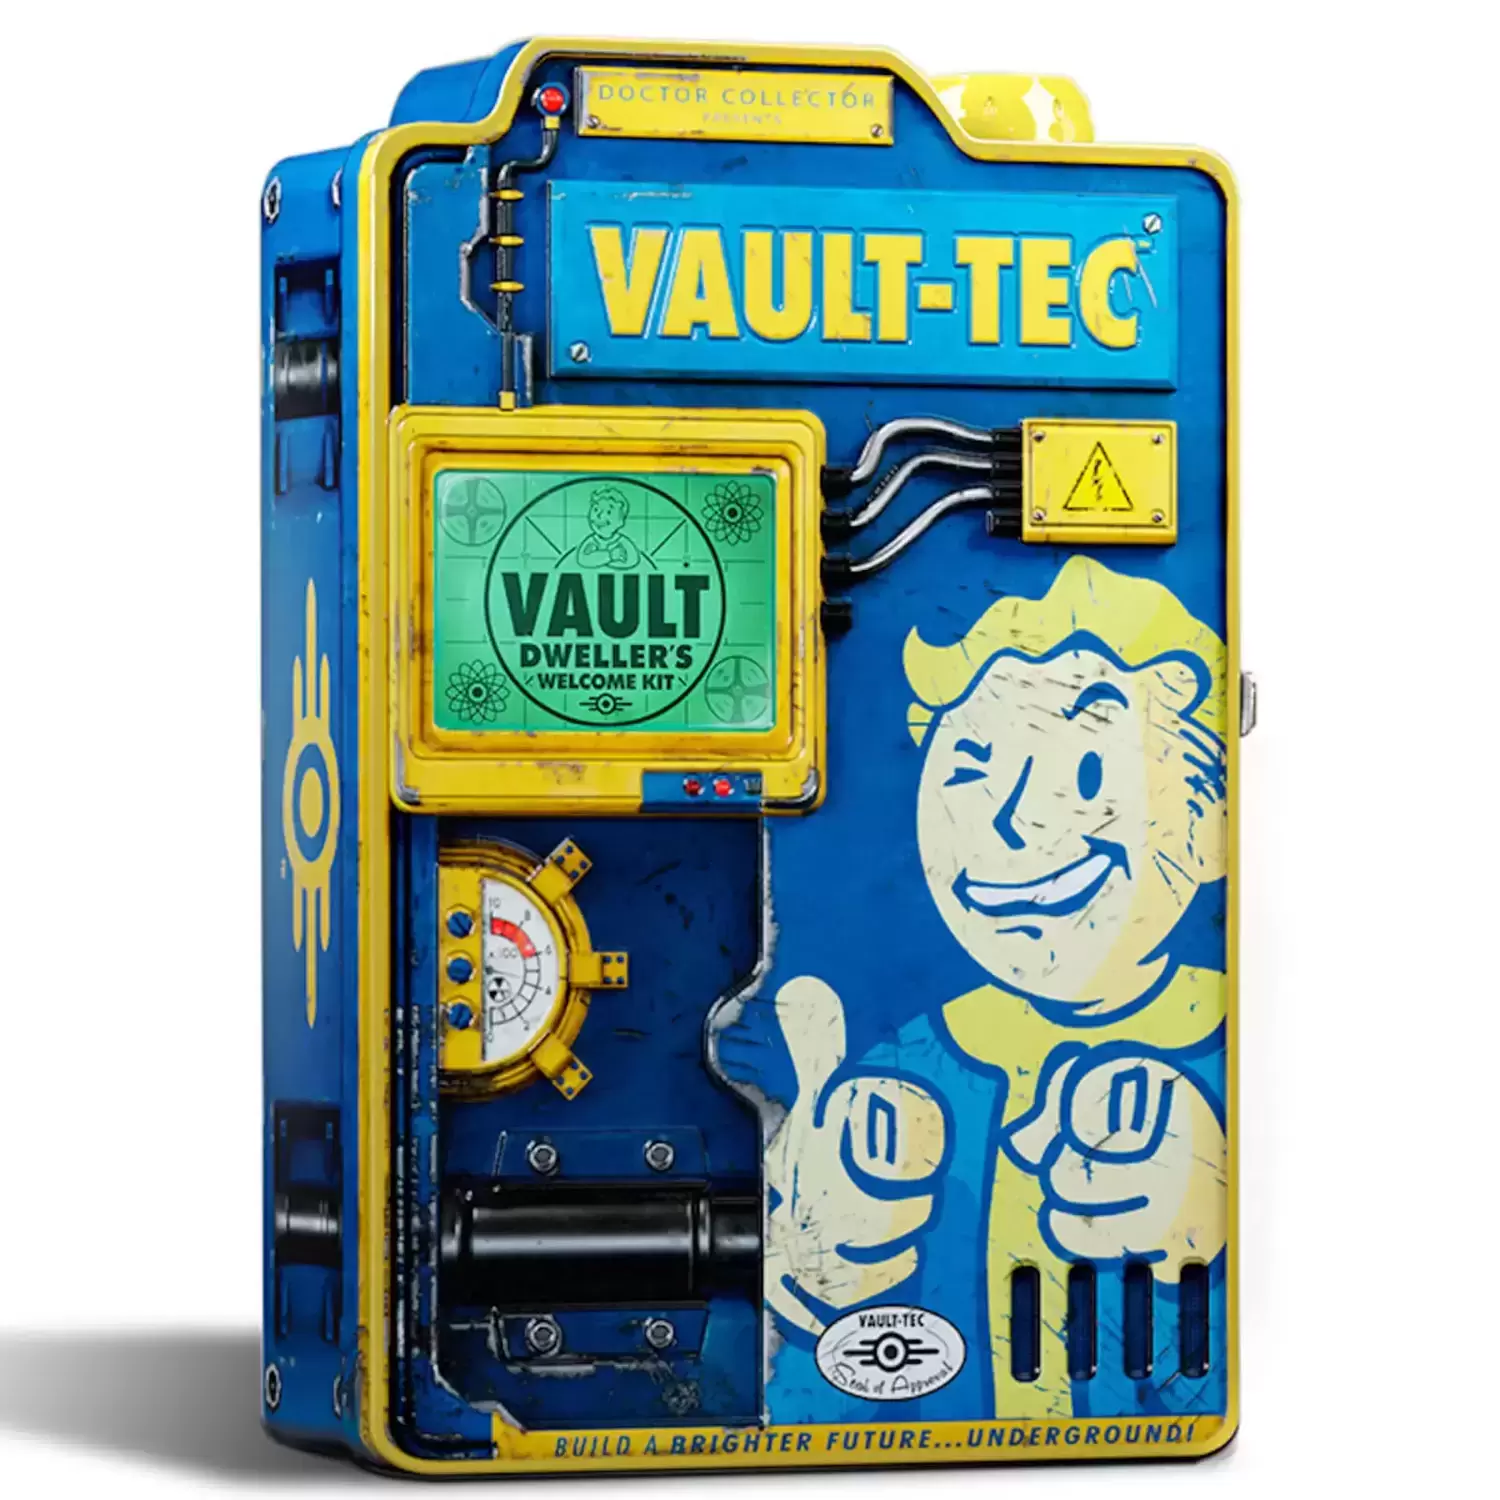 Doctor Collector - Fallout Vault Dweller\'s Welcome Kit with Vault-Tec Slide Projector